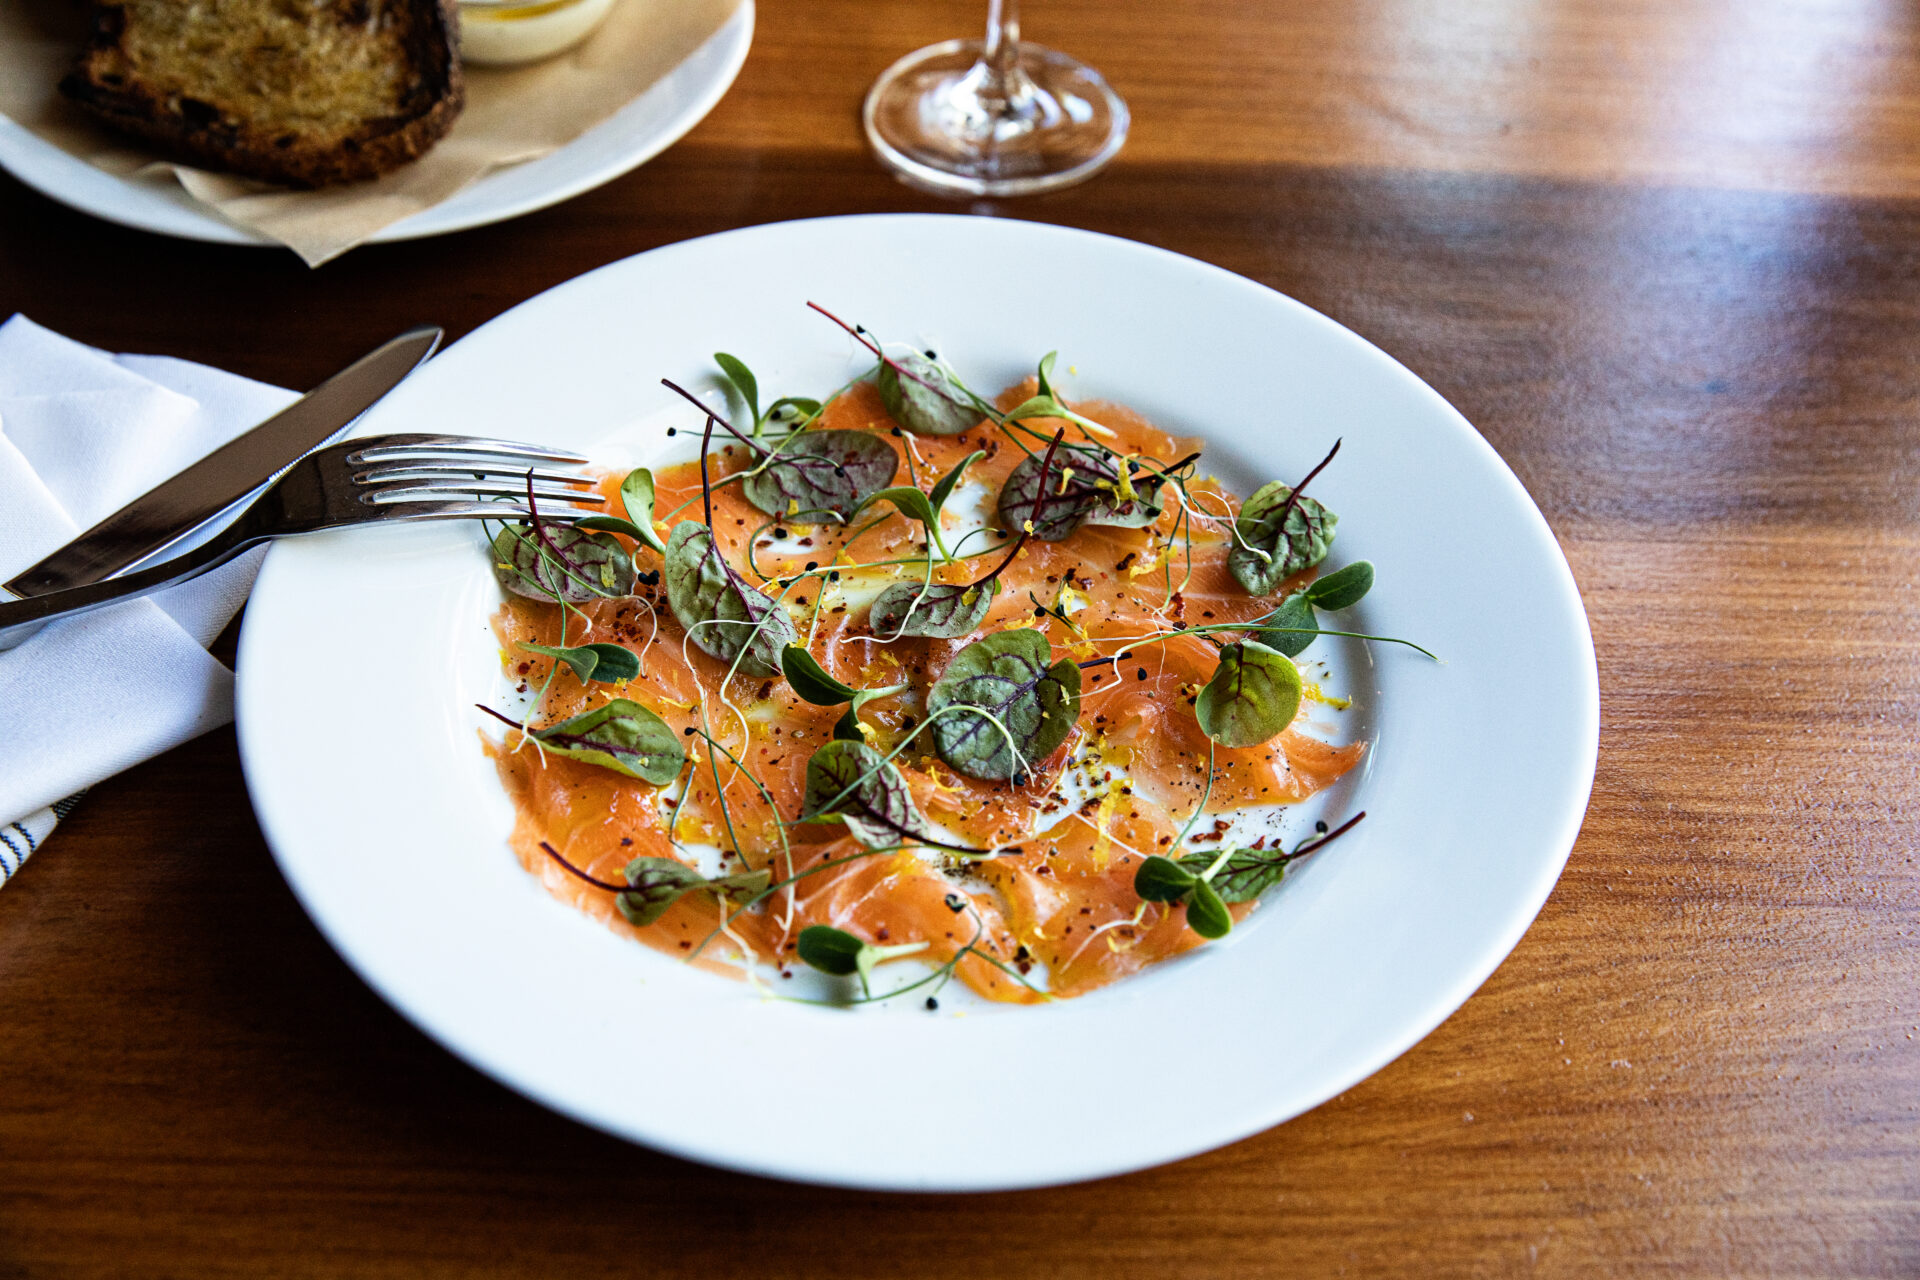 Verns, one of the new South Carolina restaurants. Dish pictured: Cured Salmon Photo Credit Andrew Cebulka 